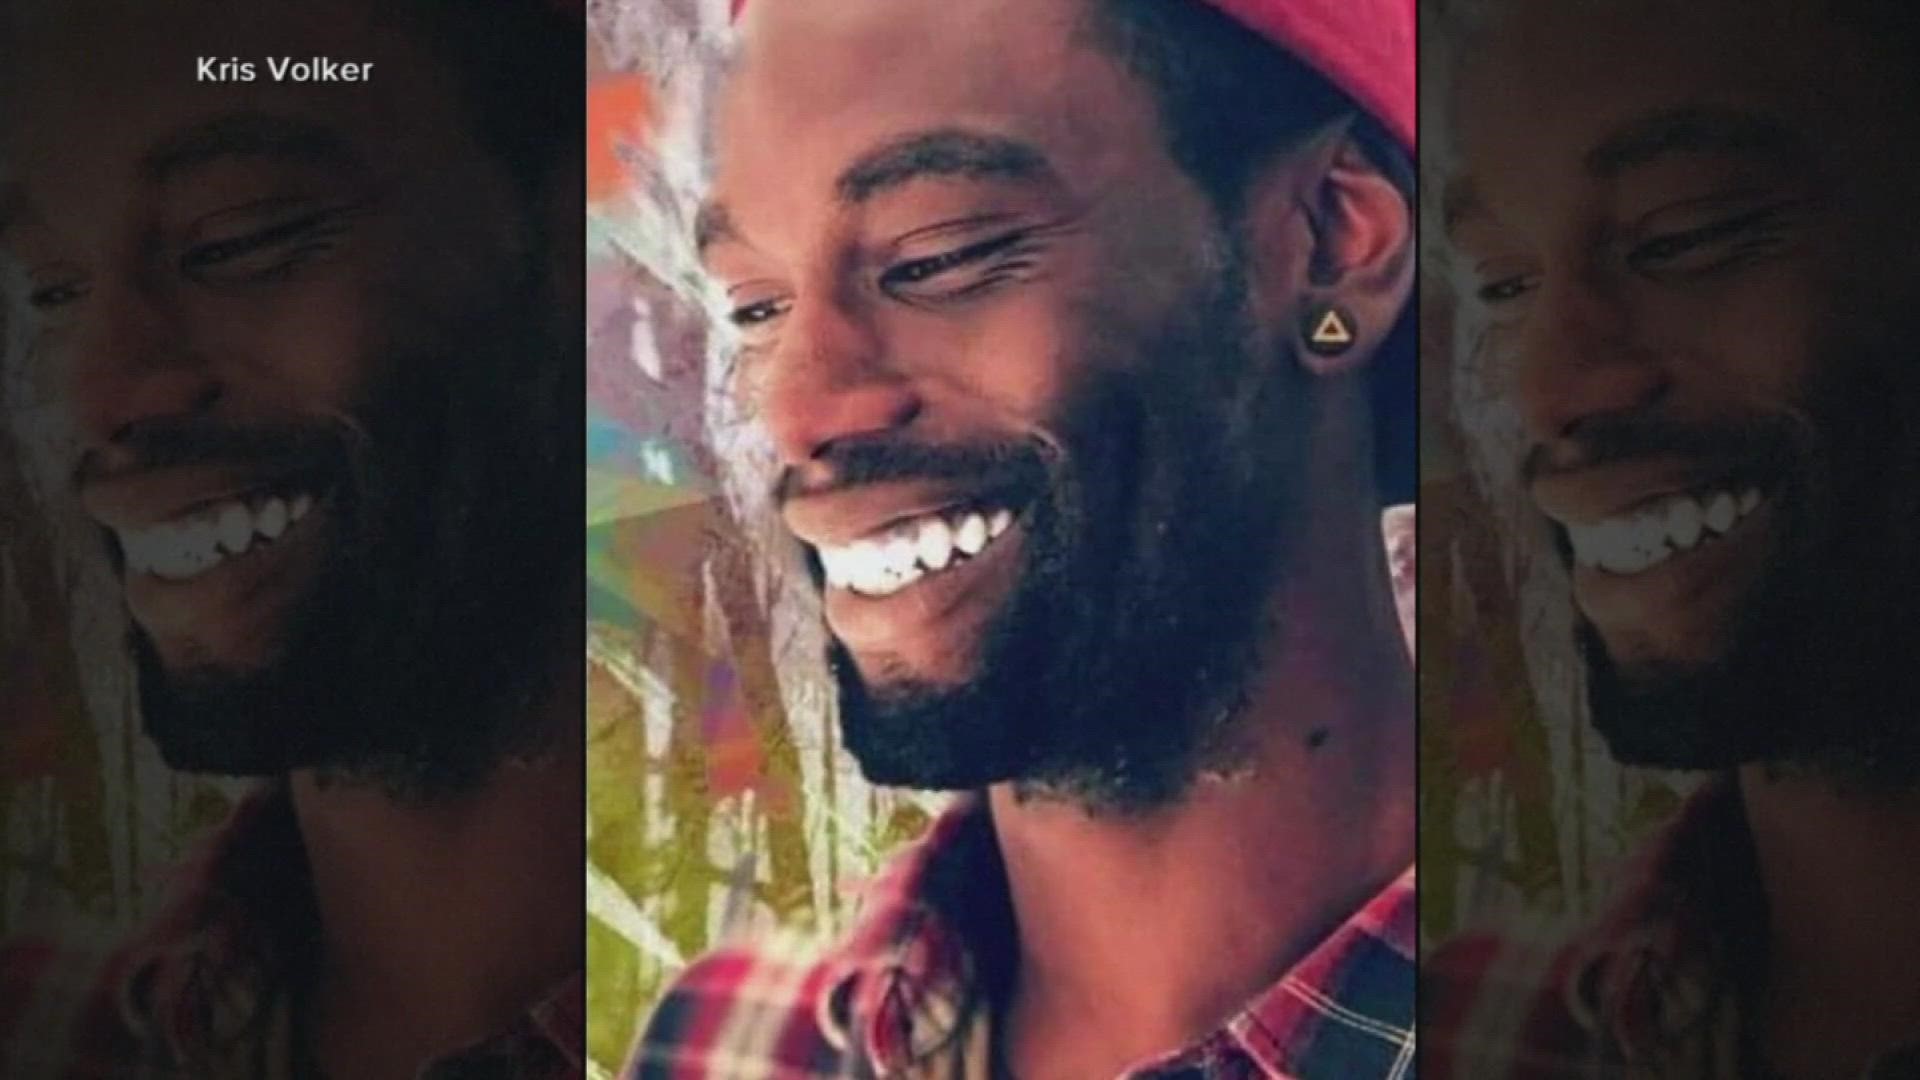 The 29-year-old's death shocked the nation after the release of video showing Memphis police officers violently beating him during a traffic stop.